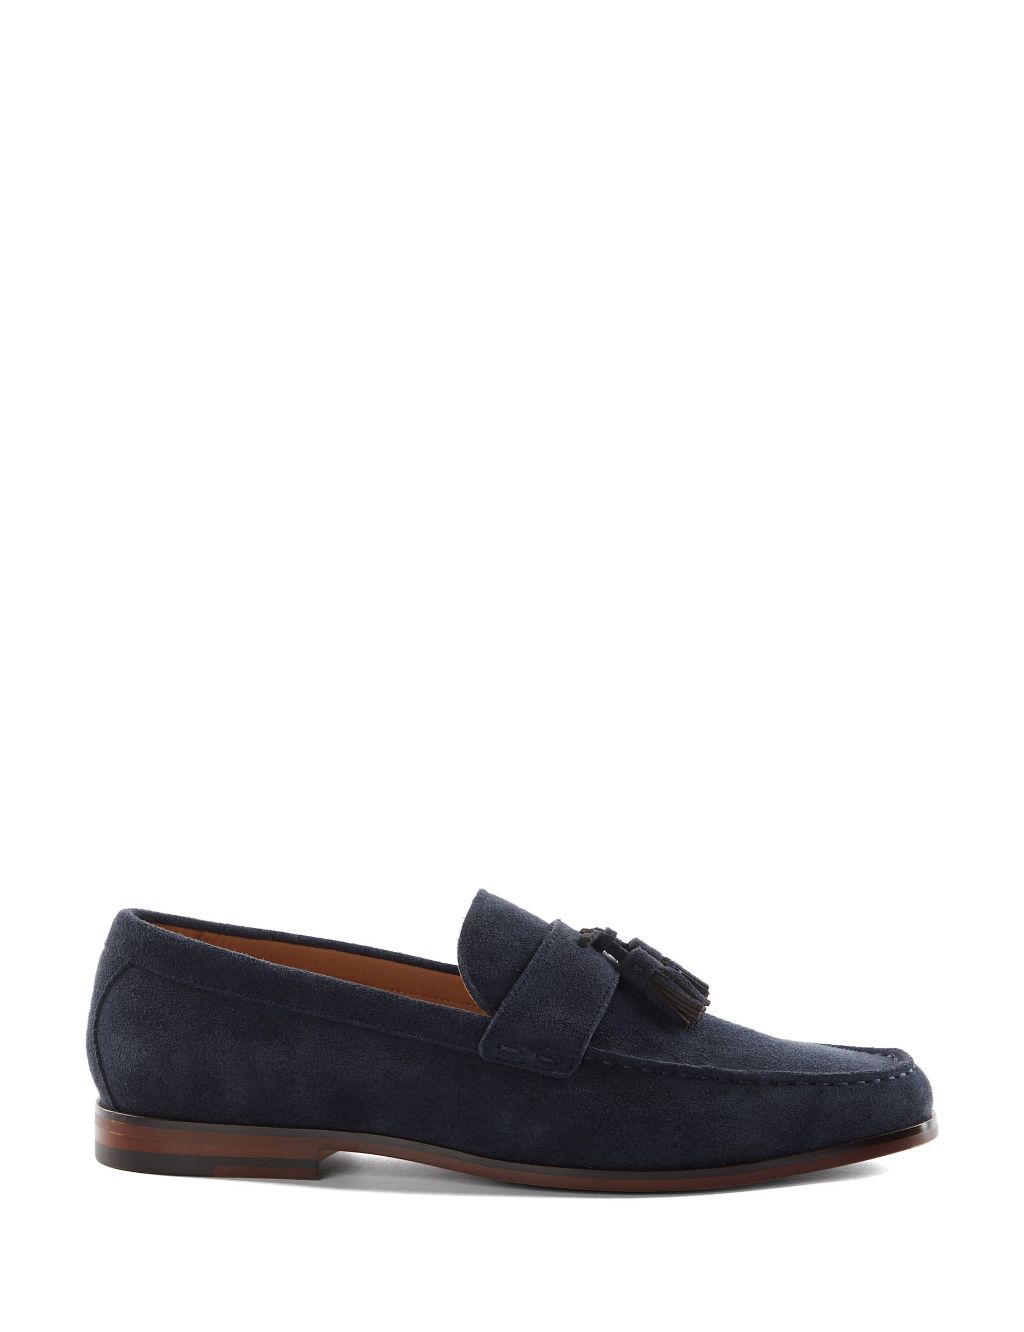 Suede Slip-On Loafers